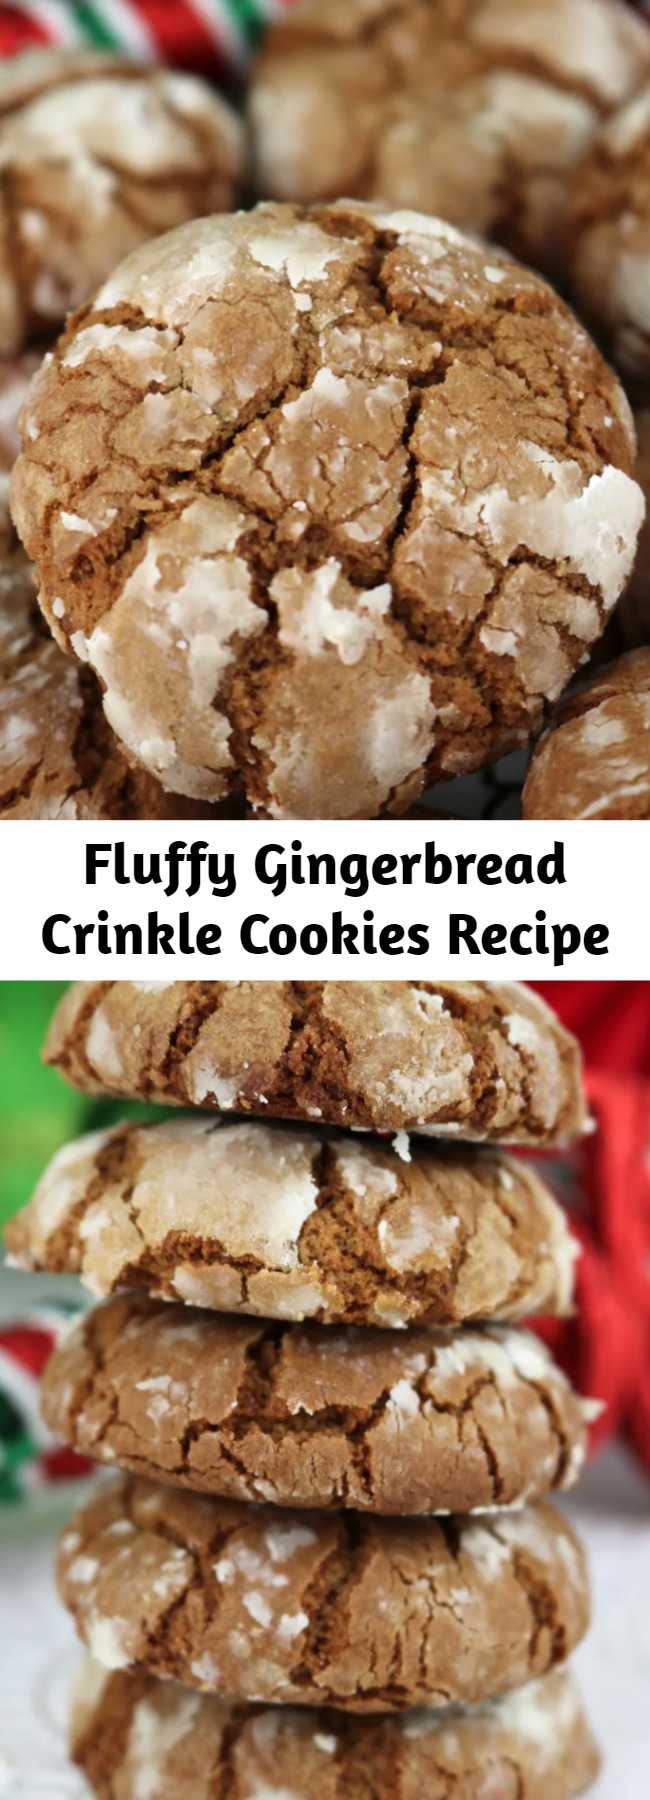 Fluffy Gingerbread Crinkle Cookies Recipe - light, fluffy and spicy on the inside and sweet and crunchy on the outside is a delicious Christmas dessert. So easy to make, so delicious, so Christmas-y! You're definitely going to want to add this recipe to your Christmas desserts baking list! #ChristmasDesserts #EasyChristmasDessert #FunChristmasDessert